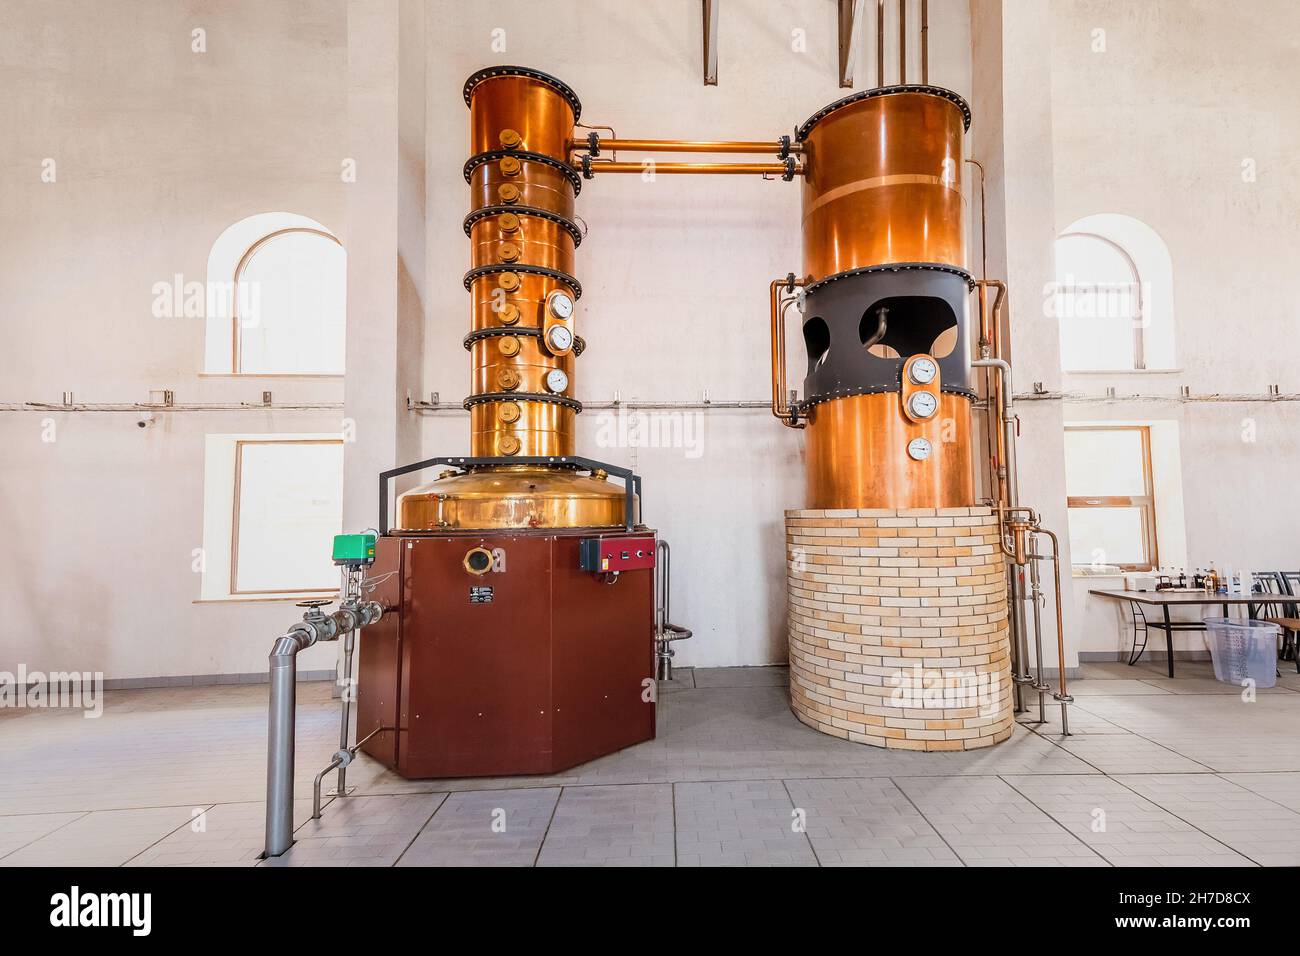 18 May 2021, Armenia Wines factory, Armenia: copper alembic still chalvignac equipment for distilling cognac and strong liqueurs Stock Photo